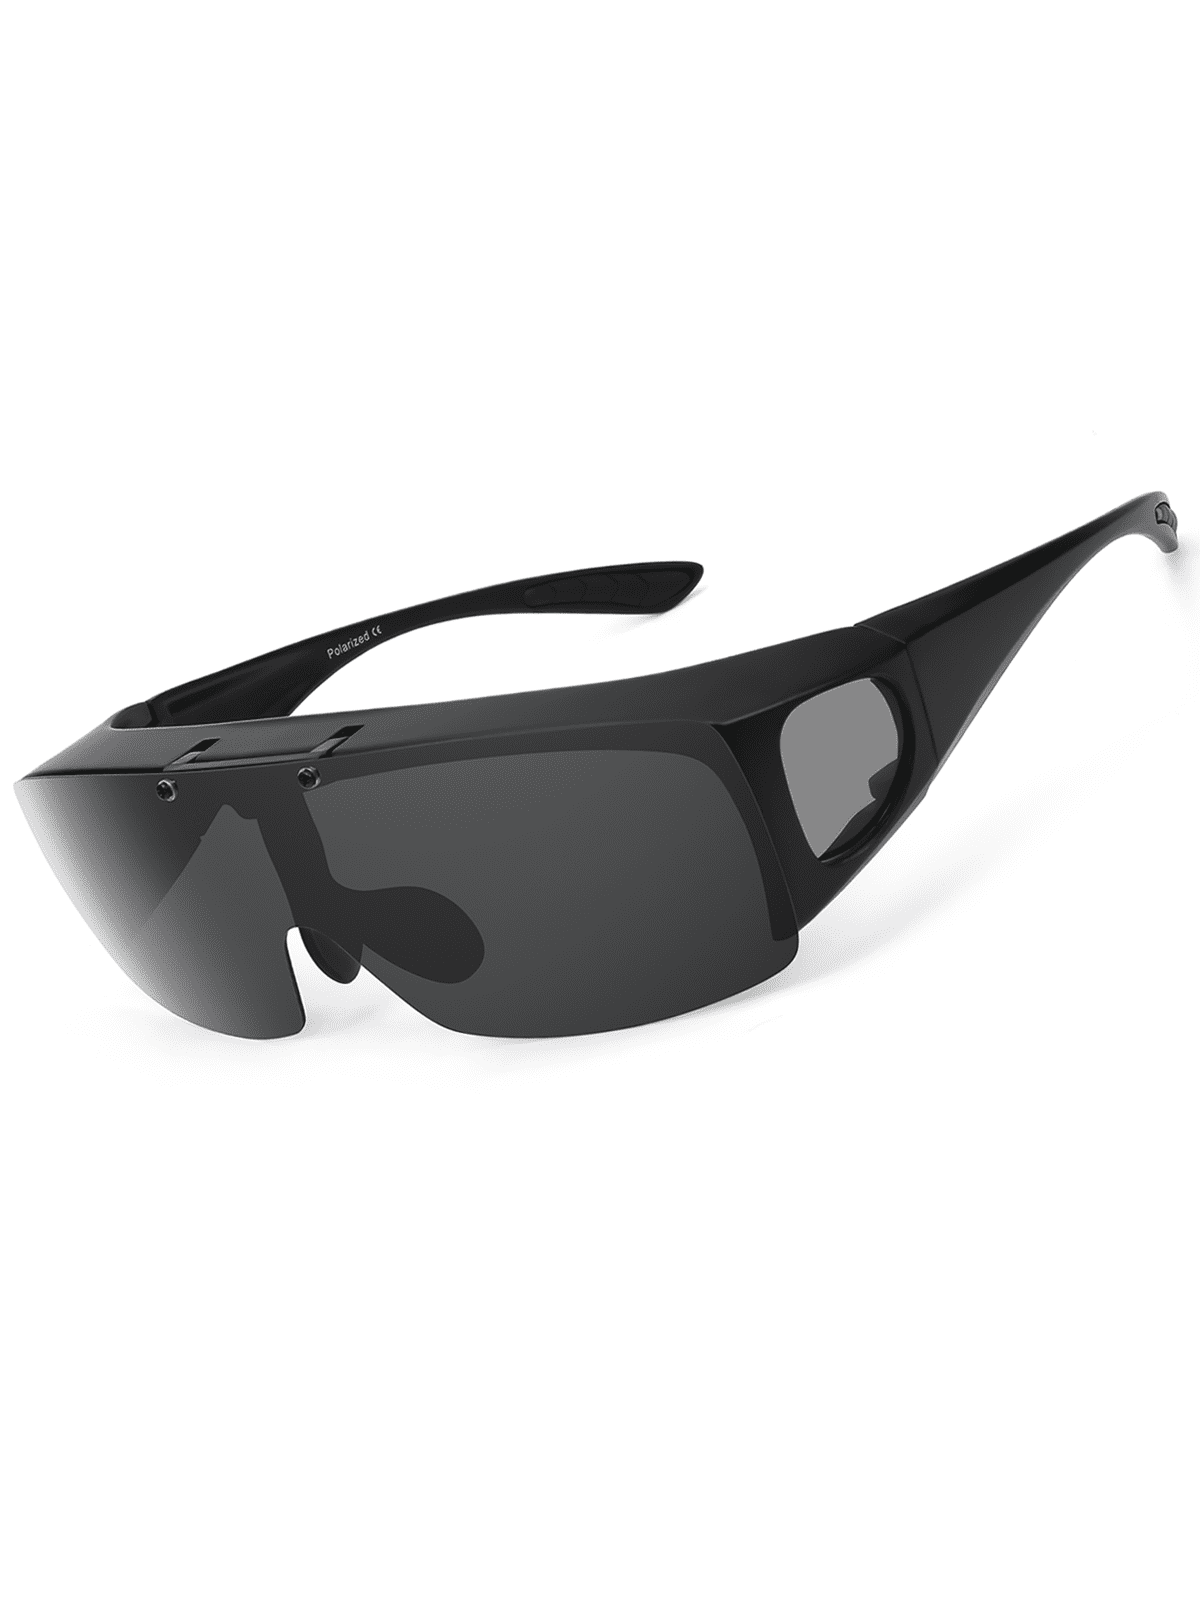 Tinhao Mens Polarized Fit Over Sunglasses Wear Over Glasses With Flip Up Uv Protection Lens For